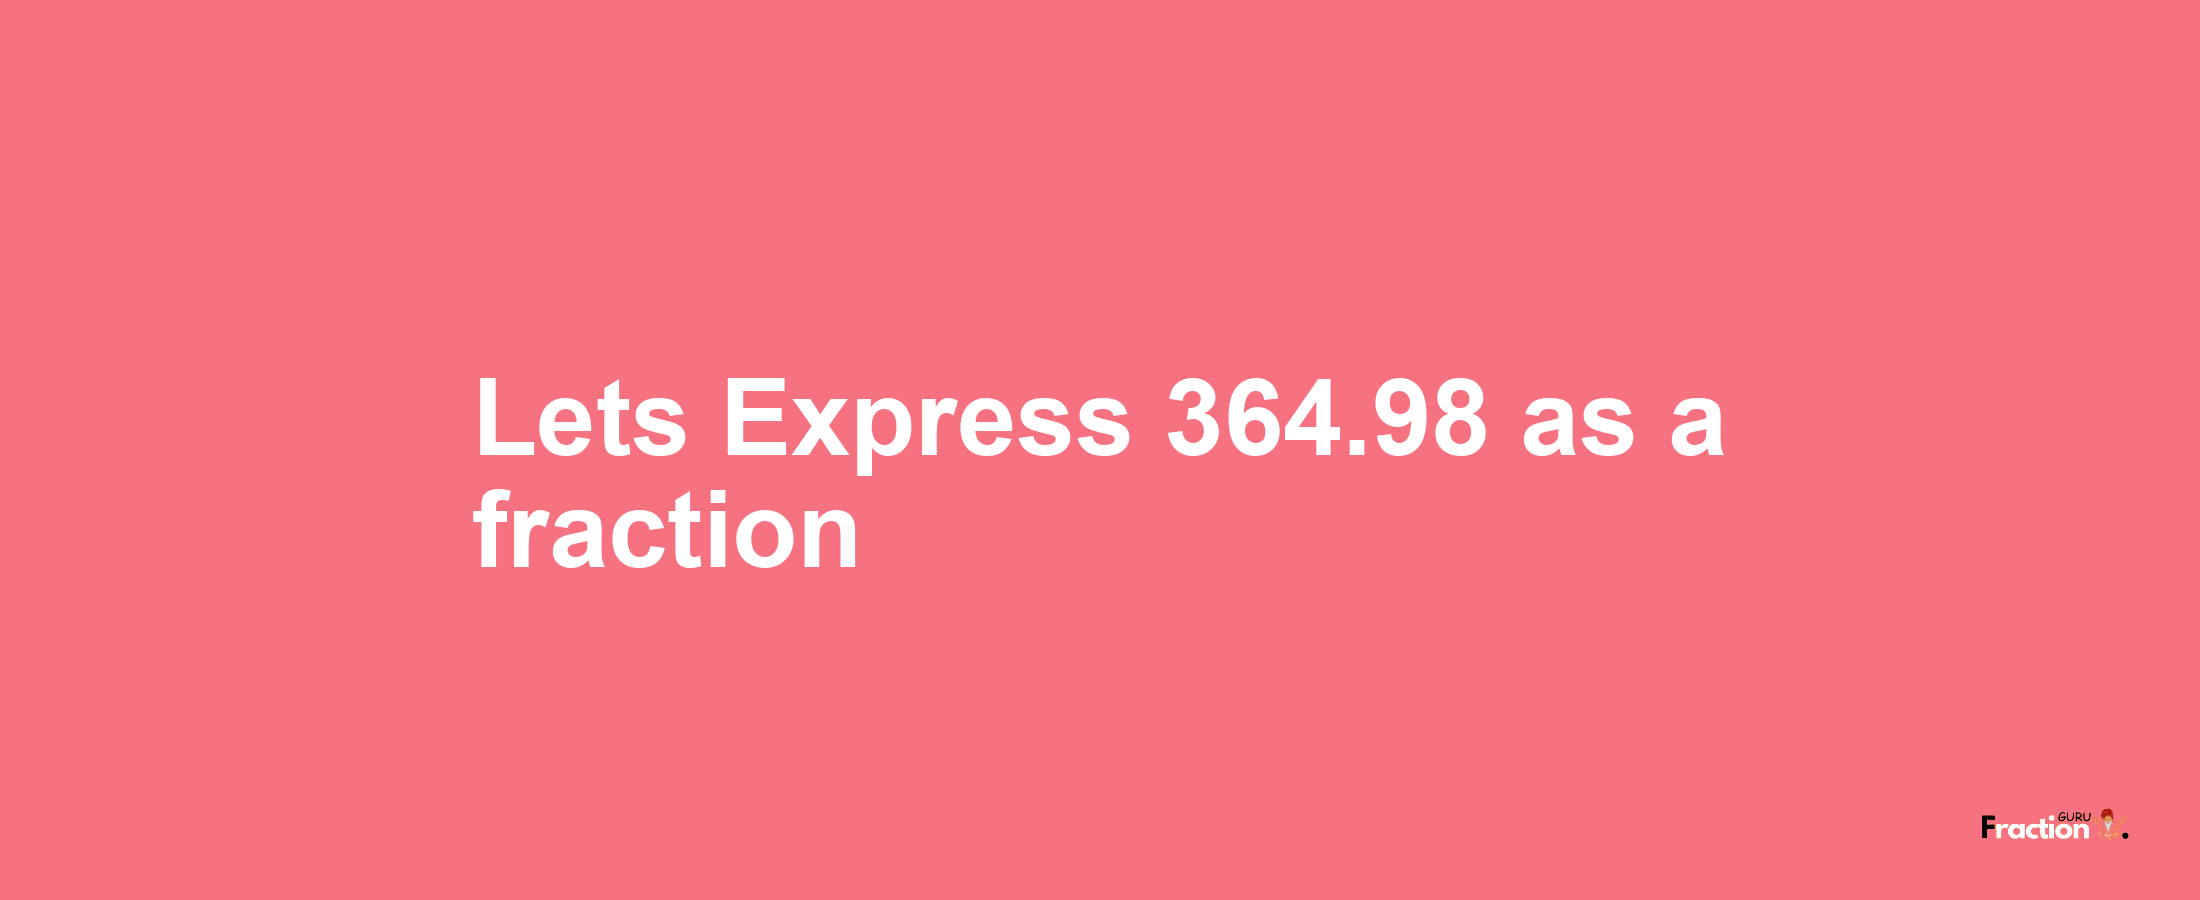 Lets Express 364.98 as afraction